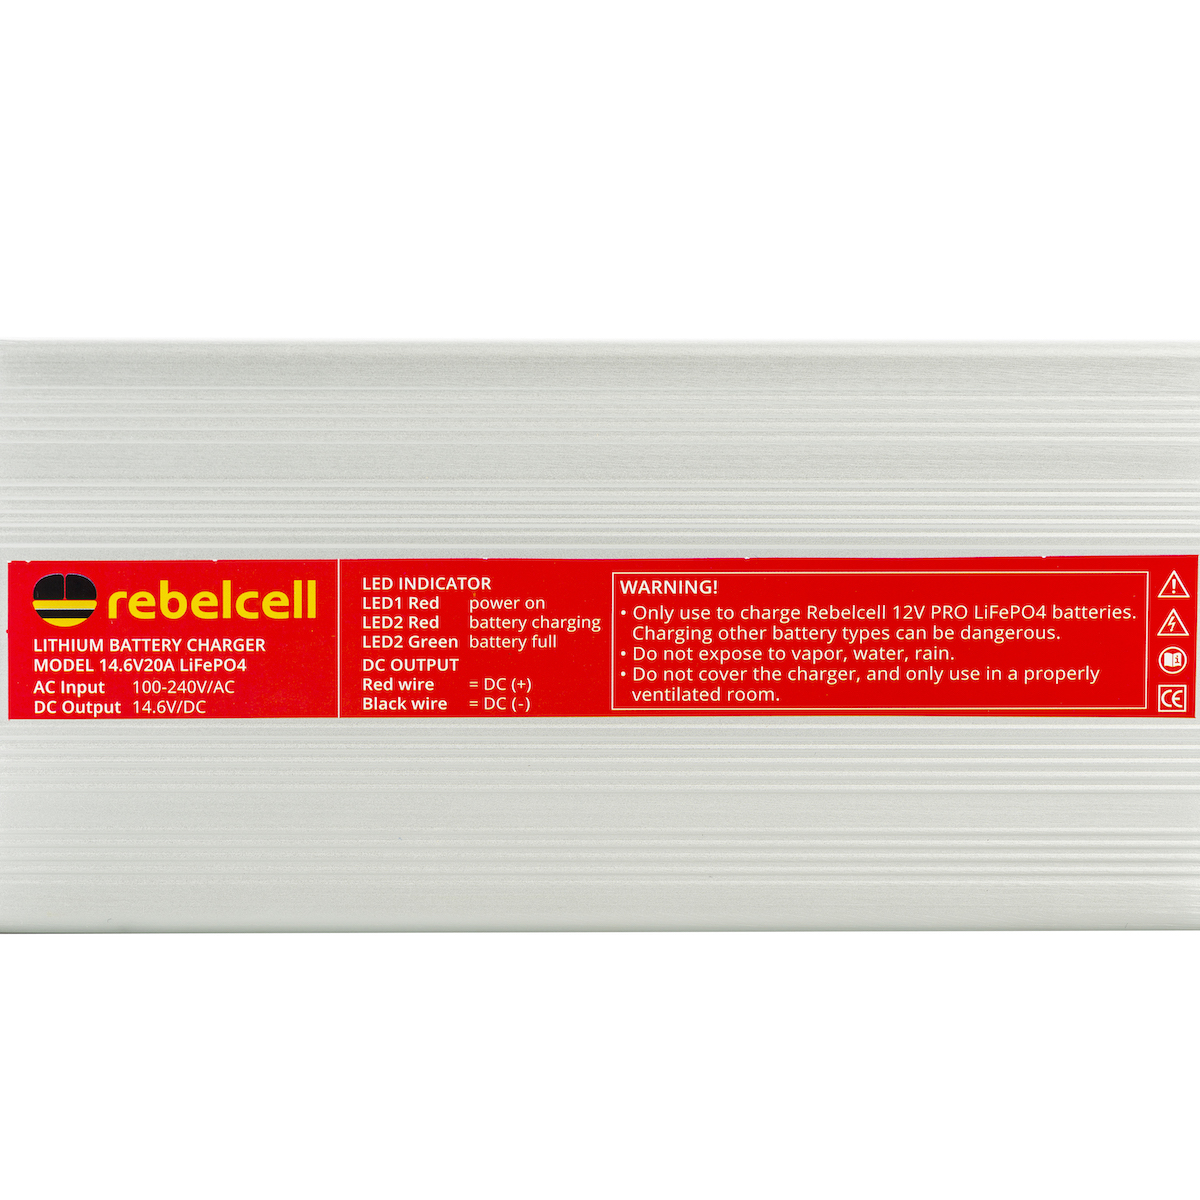 Chargeur 14.6V20A LiFePO4, Rebelcell